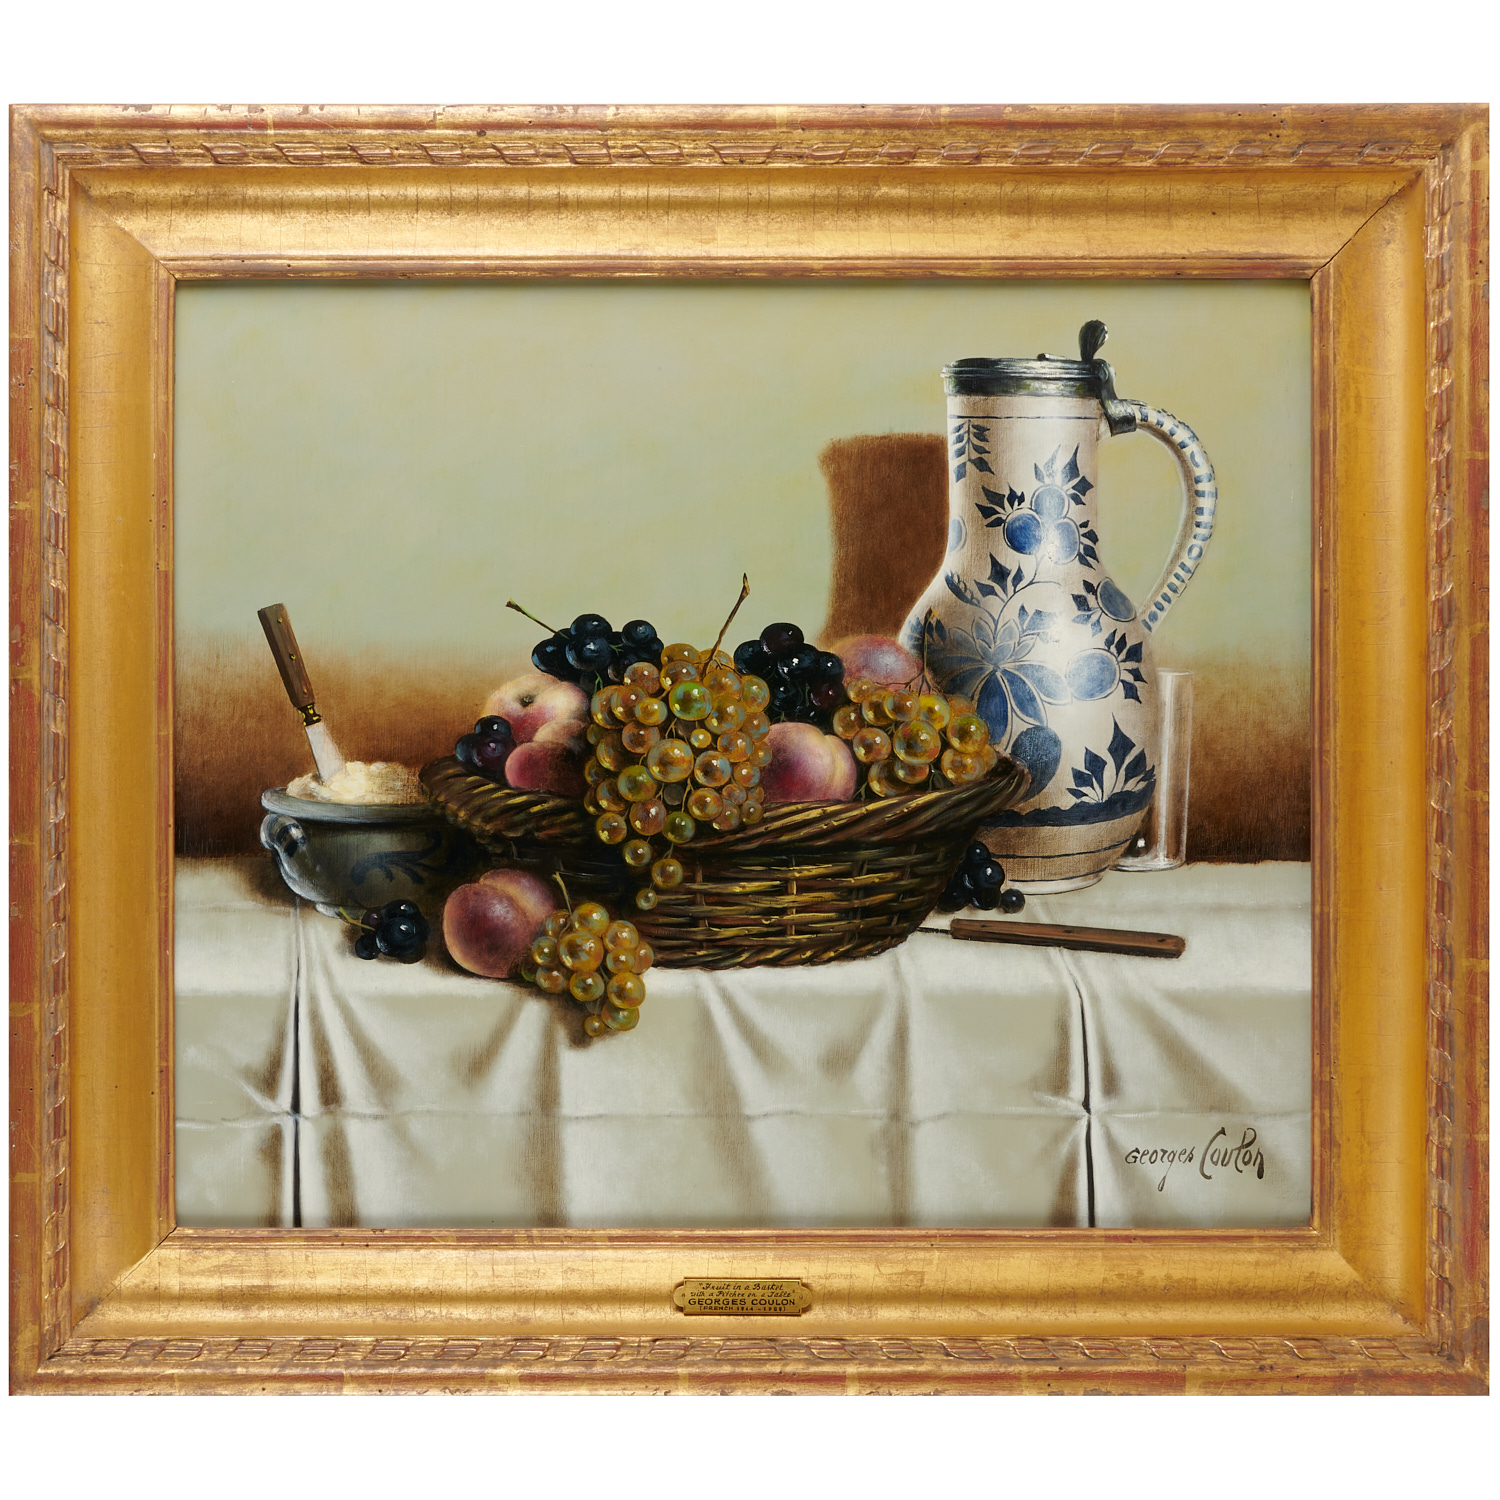 GEORGES COULON STILL LIFE PAINTING 362188